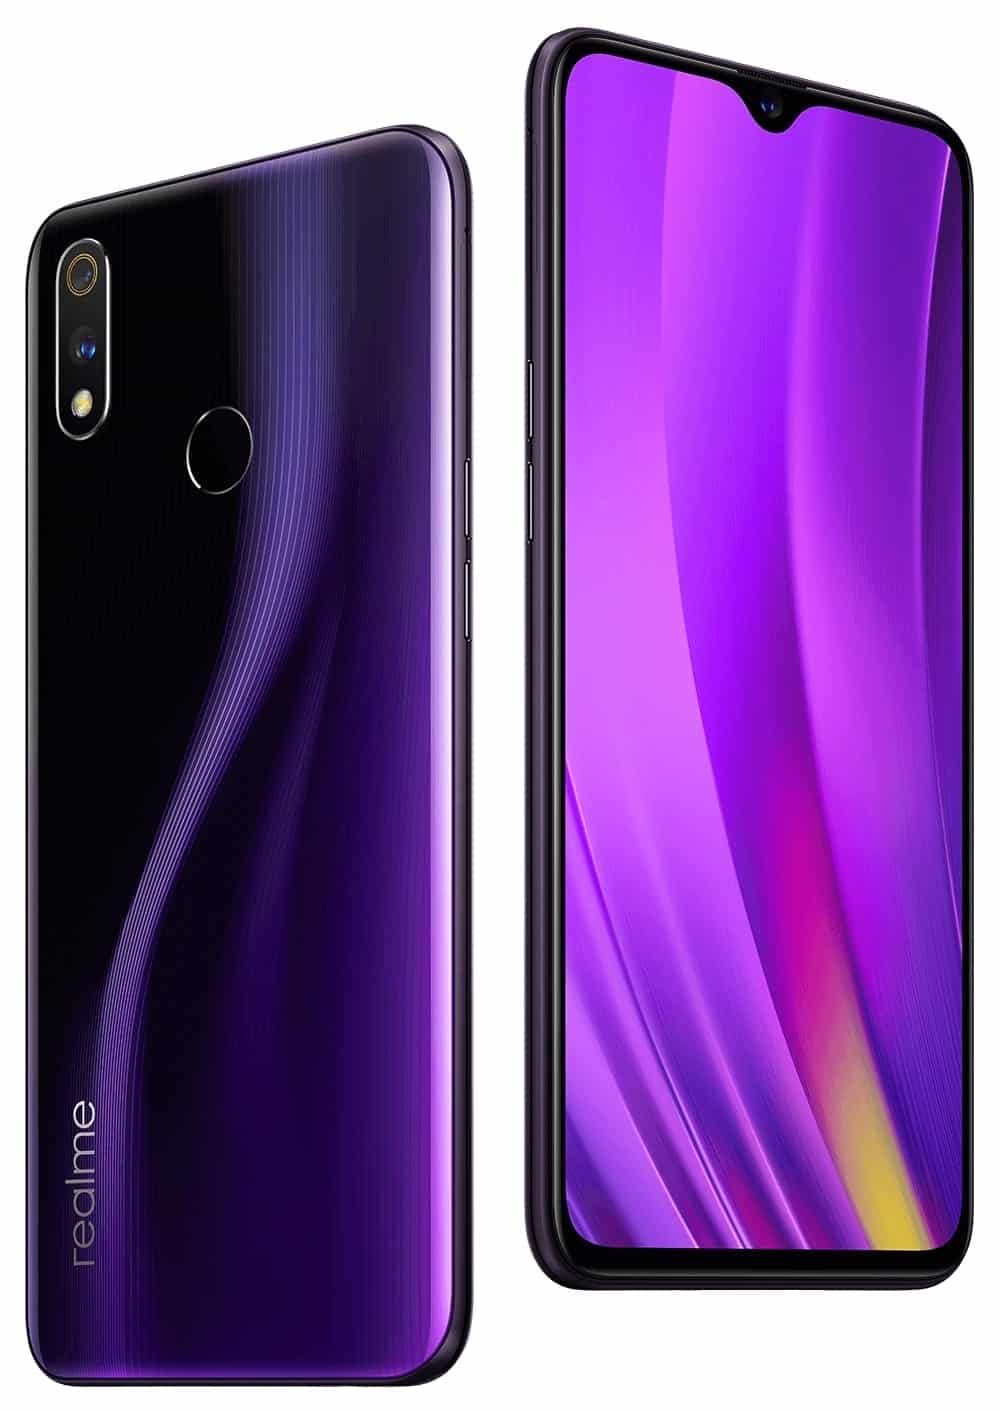 Realme 3 Pro 6GB RAM model with 64GB storage has been announced